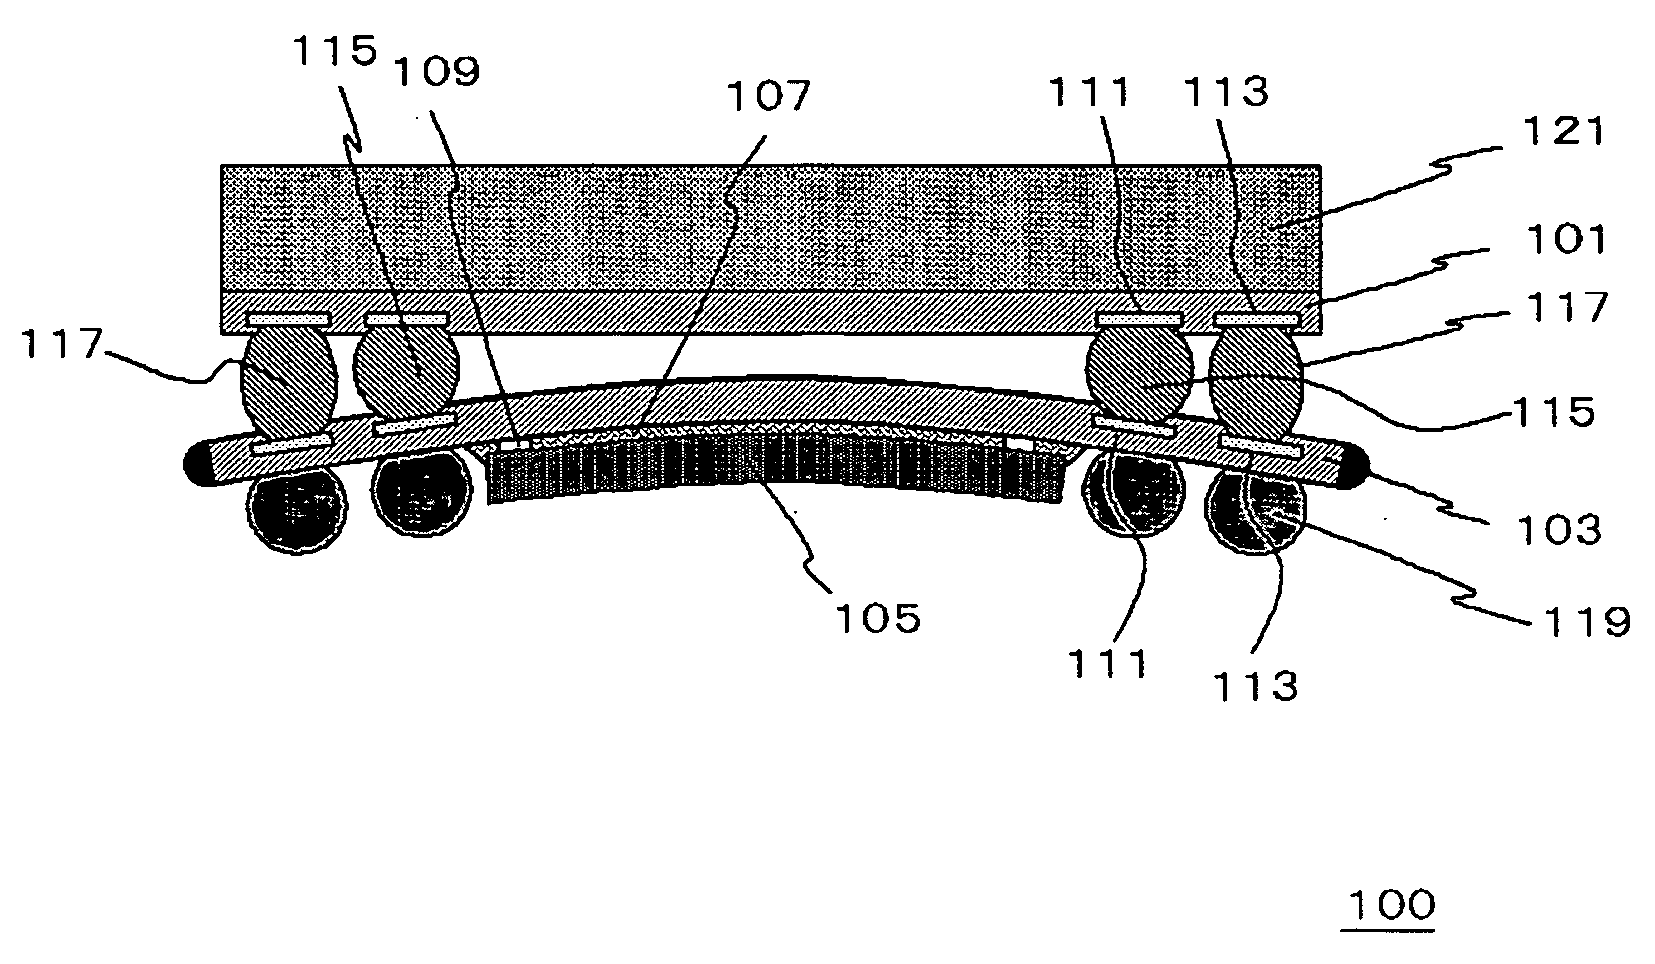 Substrate and semiconductor device